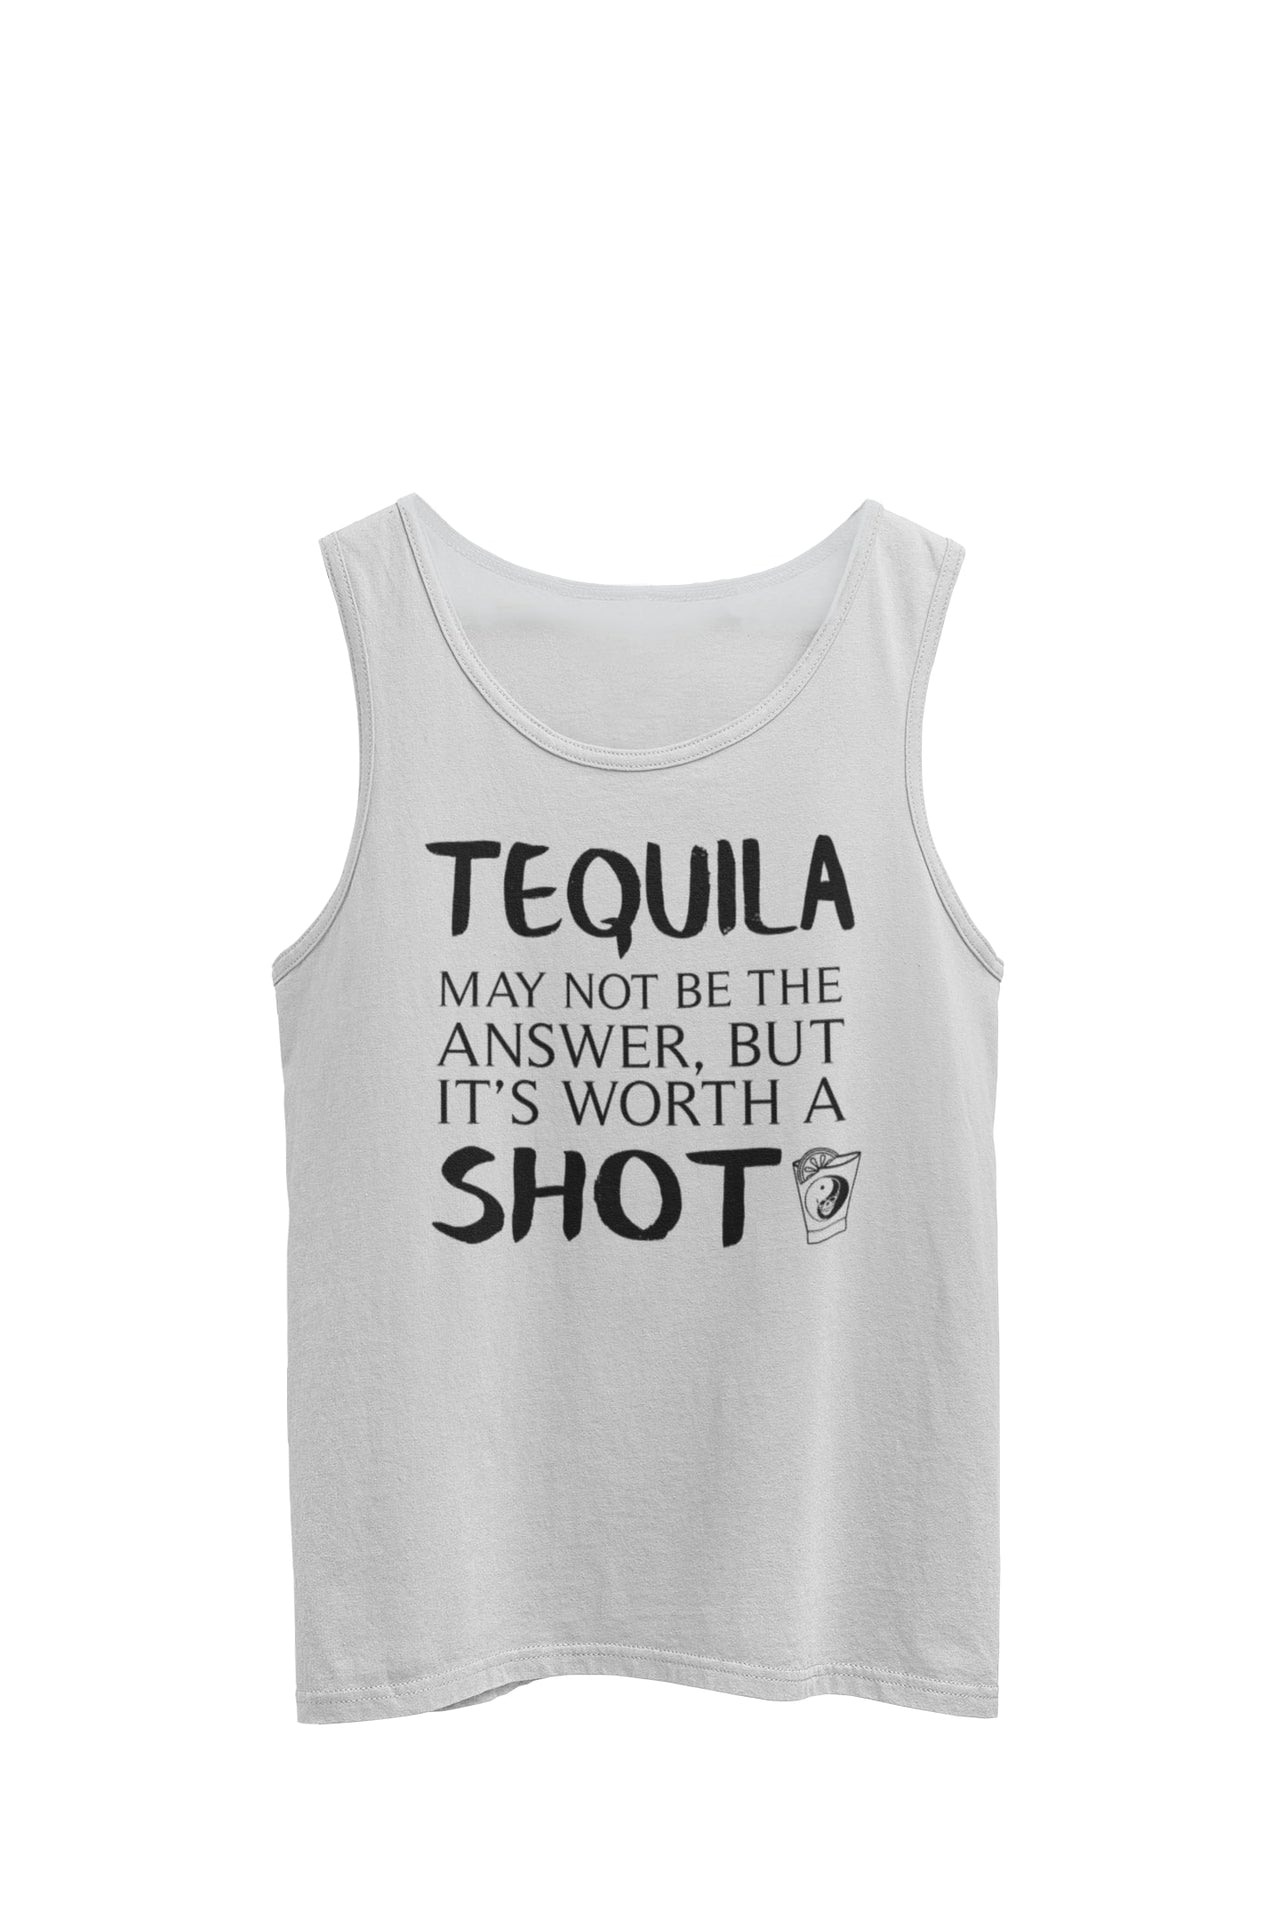 Tank Top T-shirt featuring the text 'Tequila makes my clothes fall off,' accompanied by an image of a shot glass with a yin yang symbol on each side of the words. Designed by WooHoo Apparel.